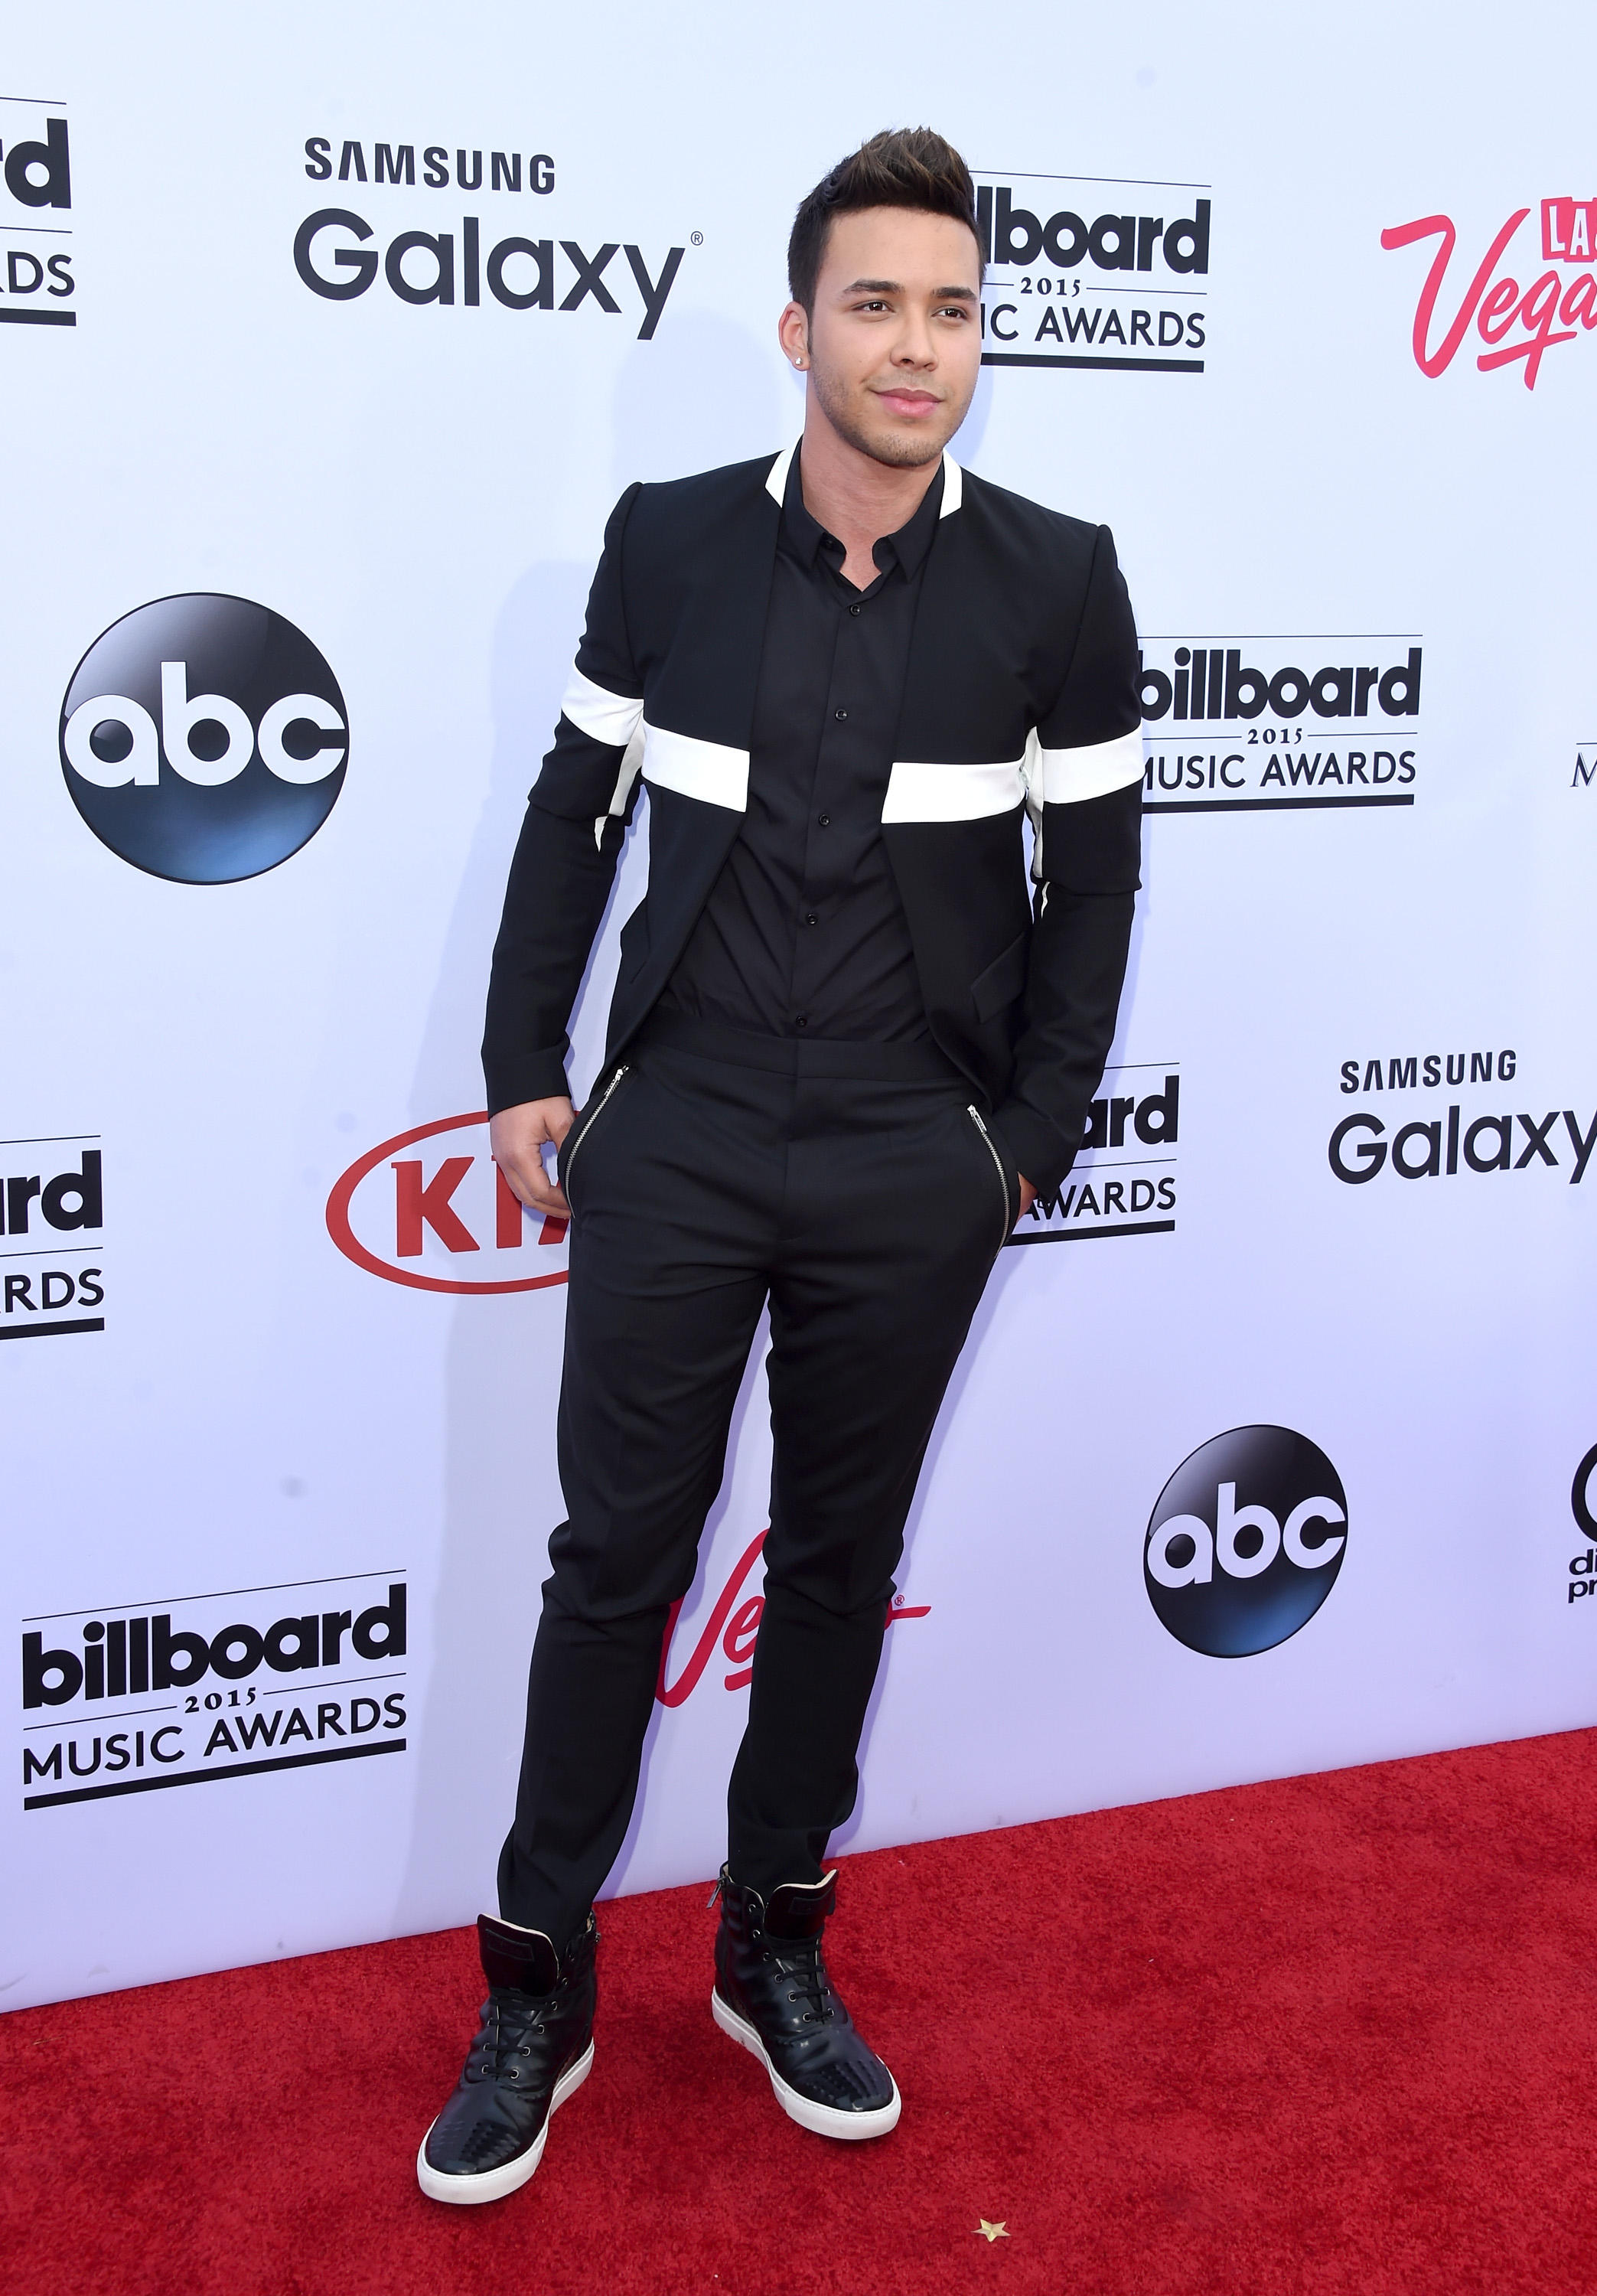 attends the 2015 Billboard Music Awards at MGM Grand Garden Arena on May 17, 2015 in Las Vegas, Nevada.